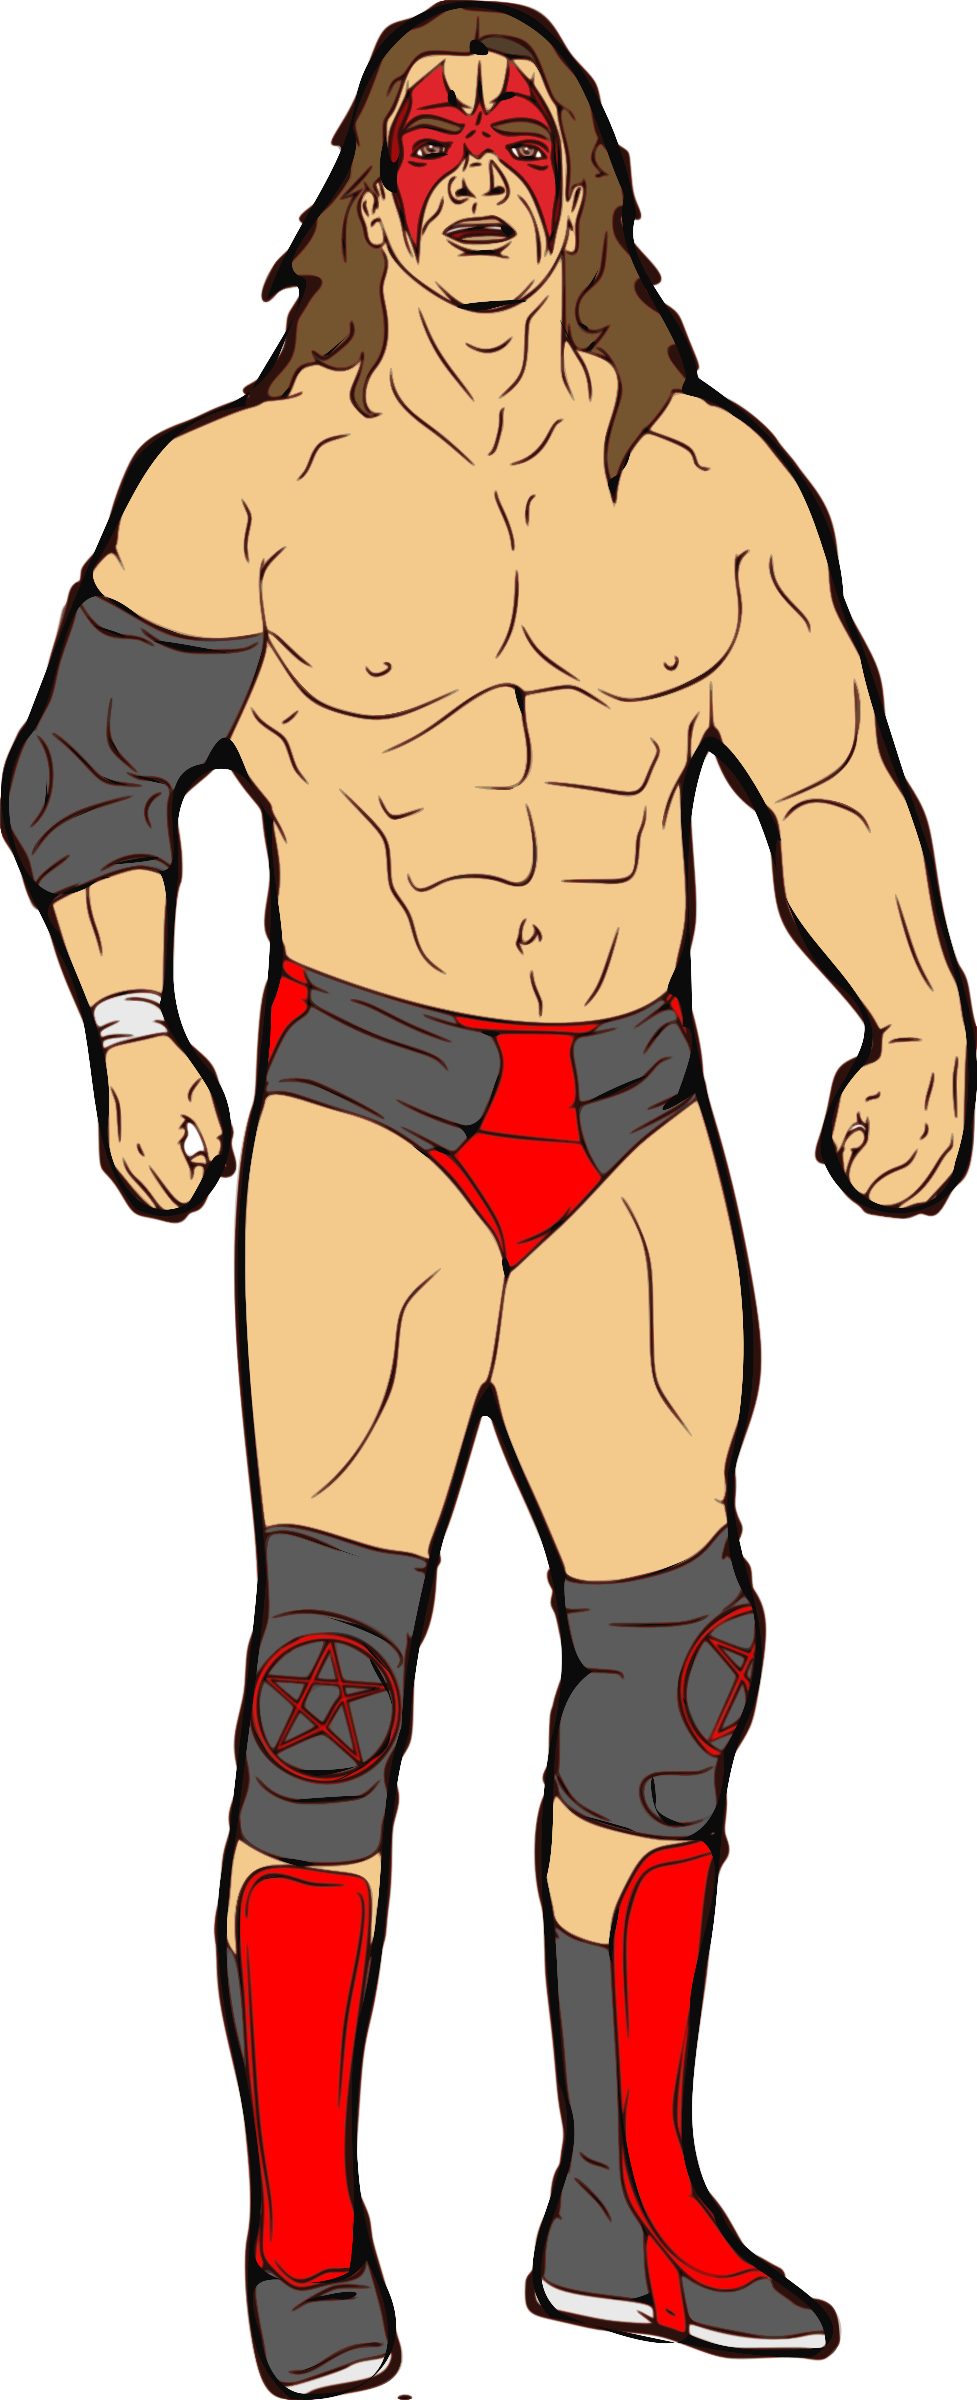 Professional wrestler icons png. Wrestlers clipart muscular